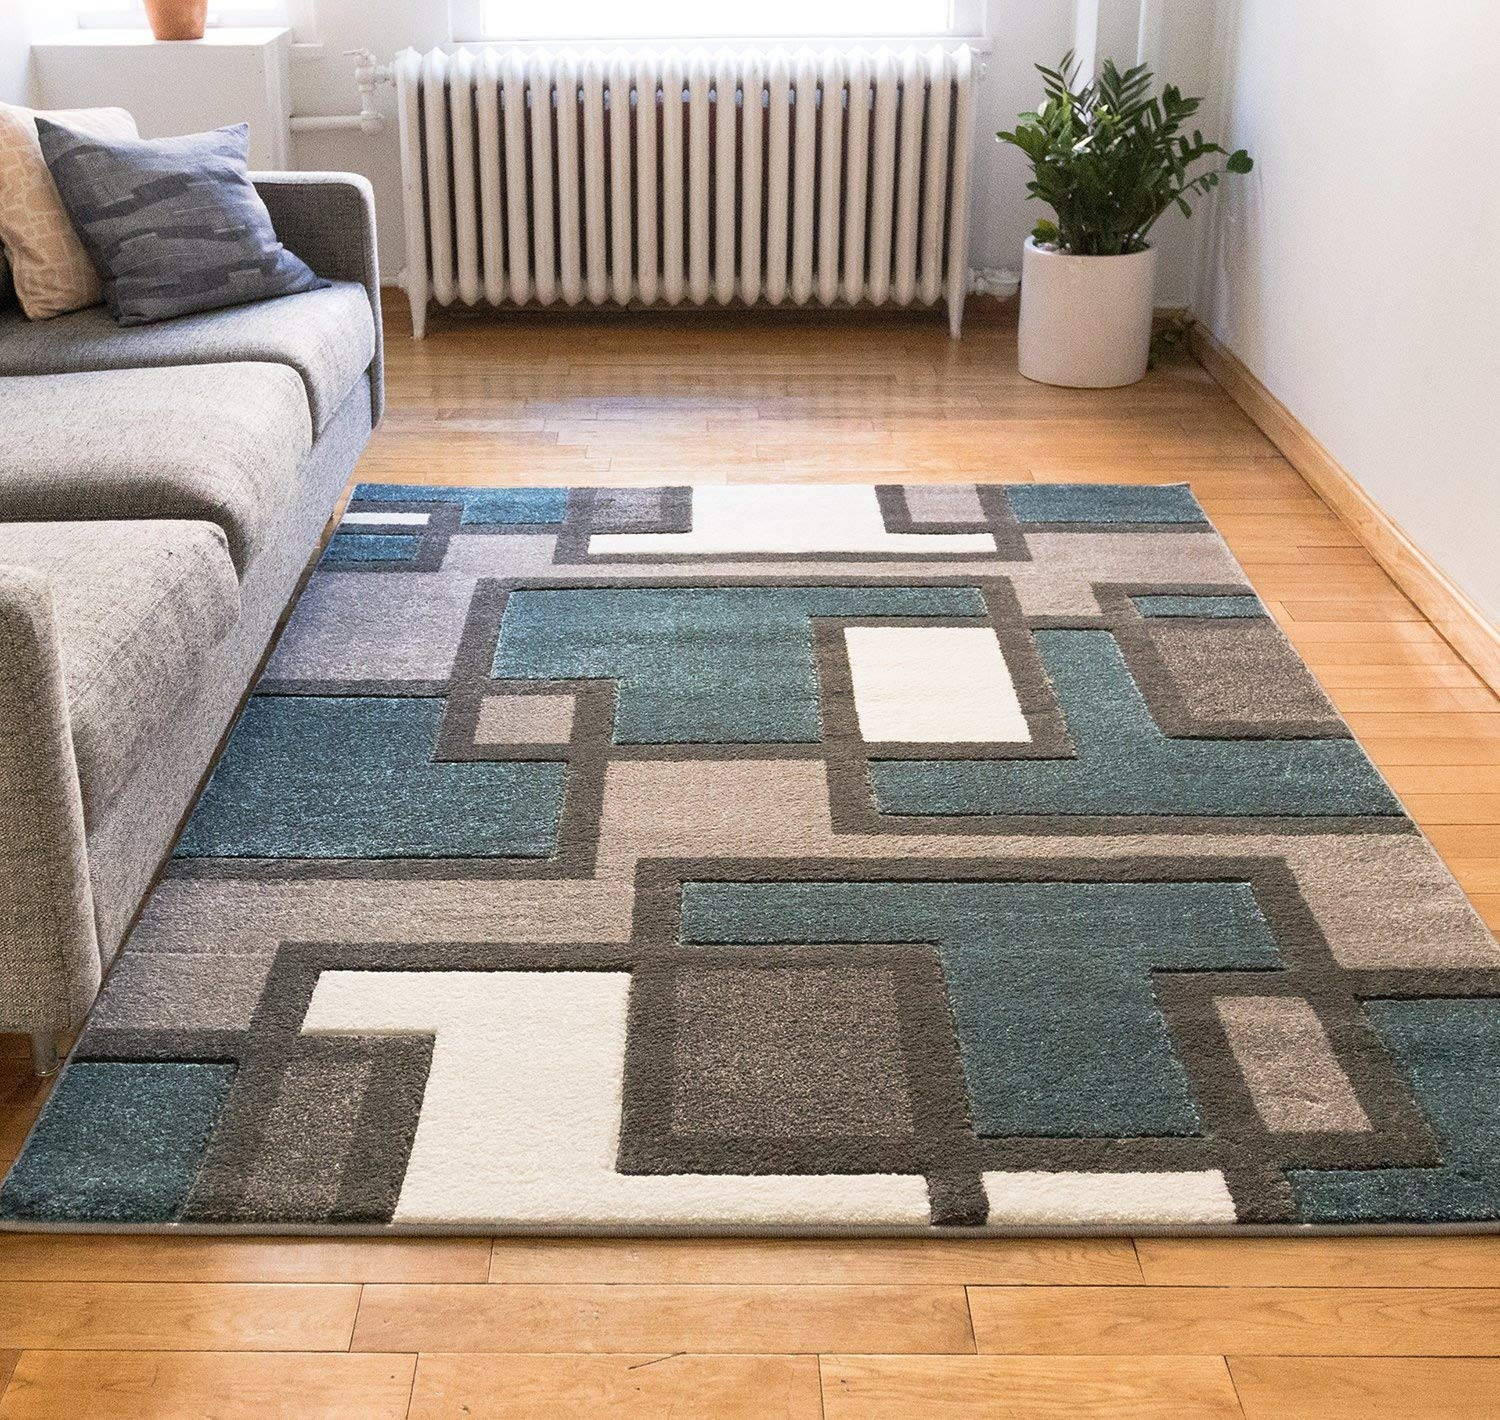 Living Room Rugs Amazon
 Accent Rug for Living Room Amazon